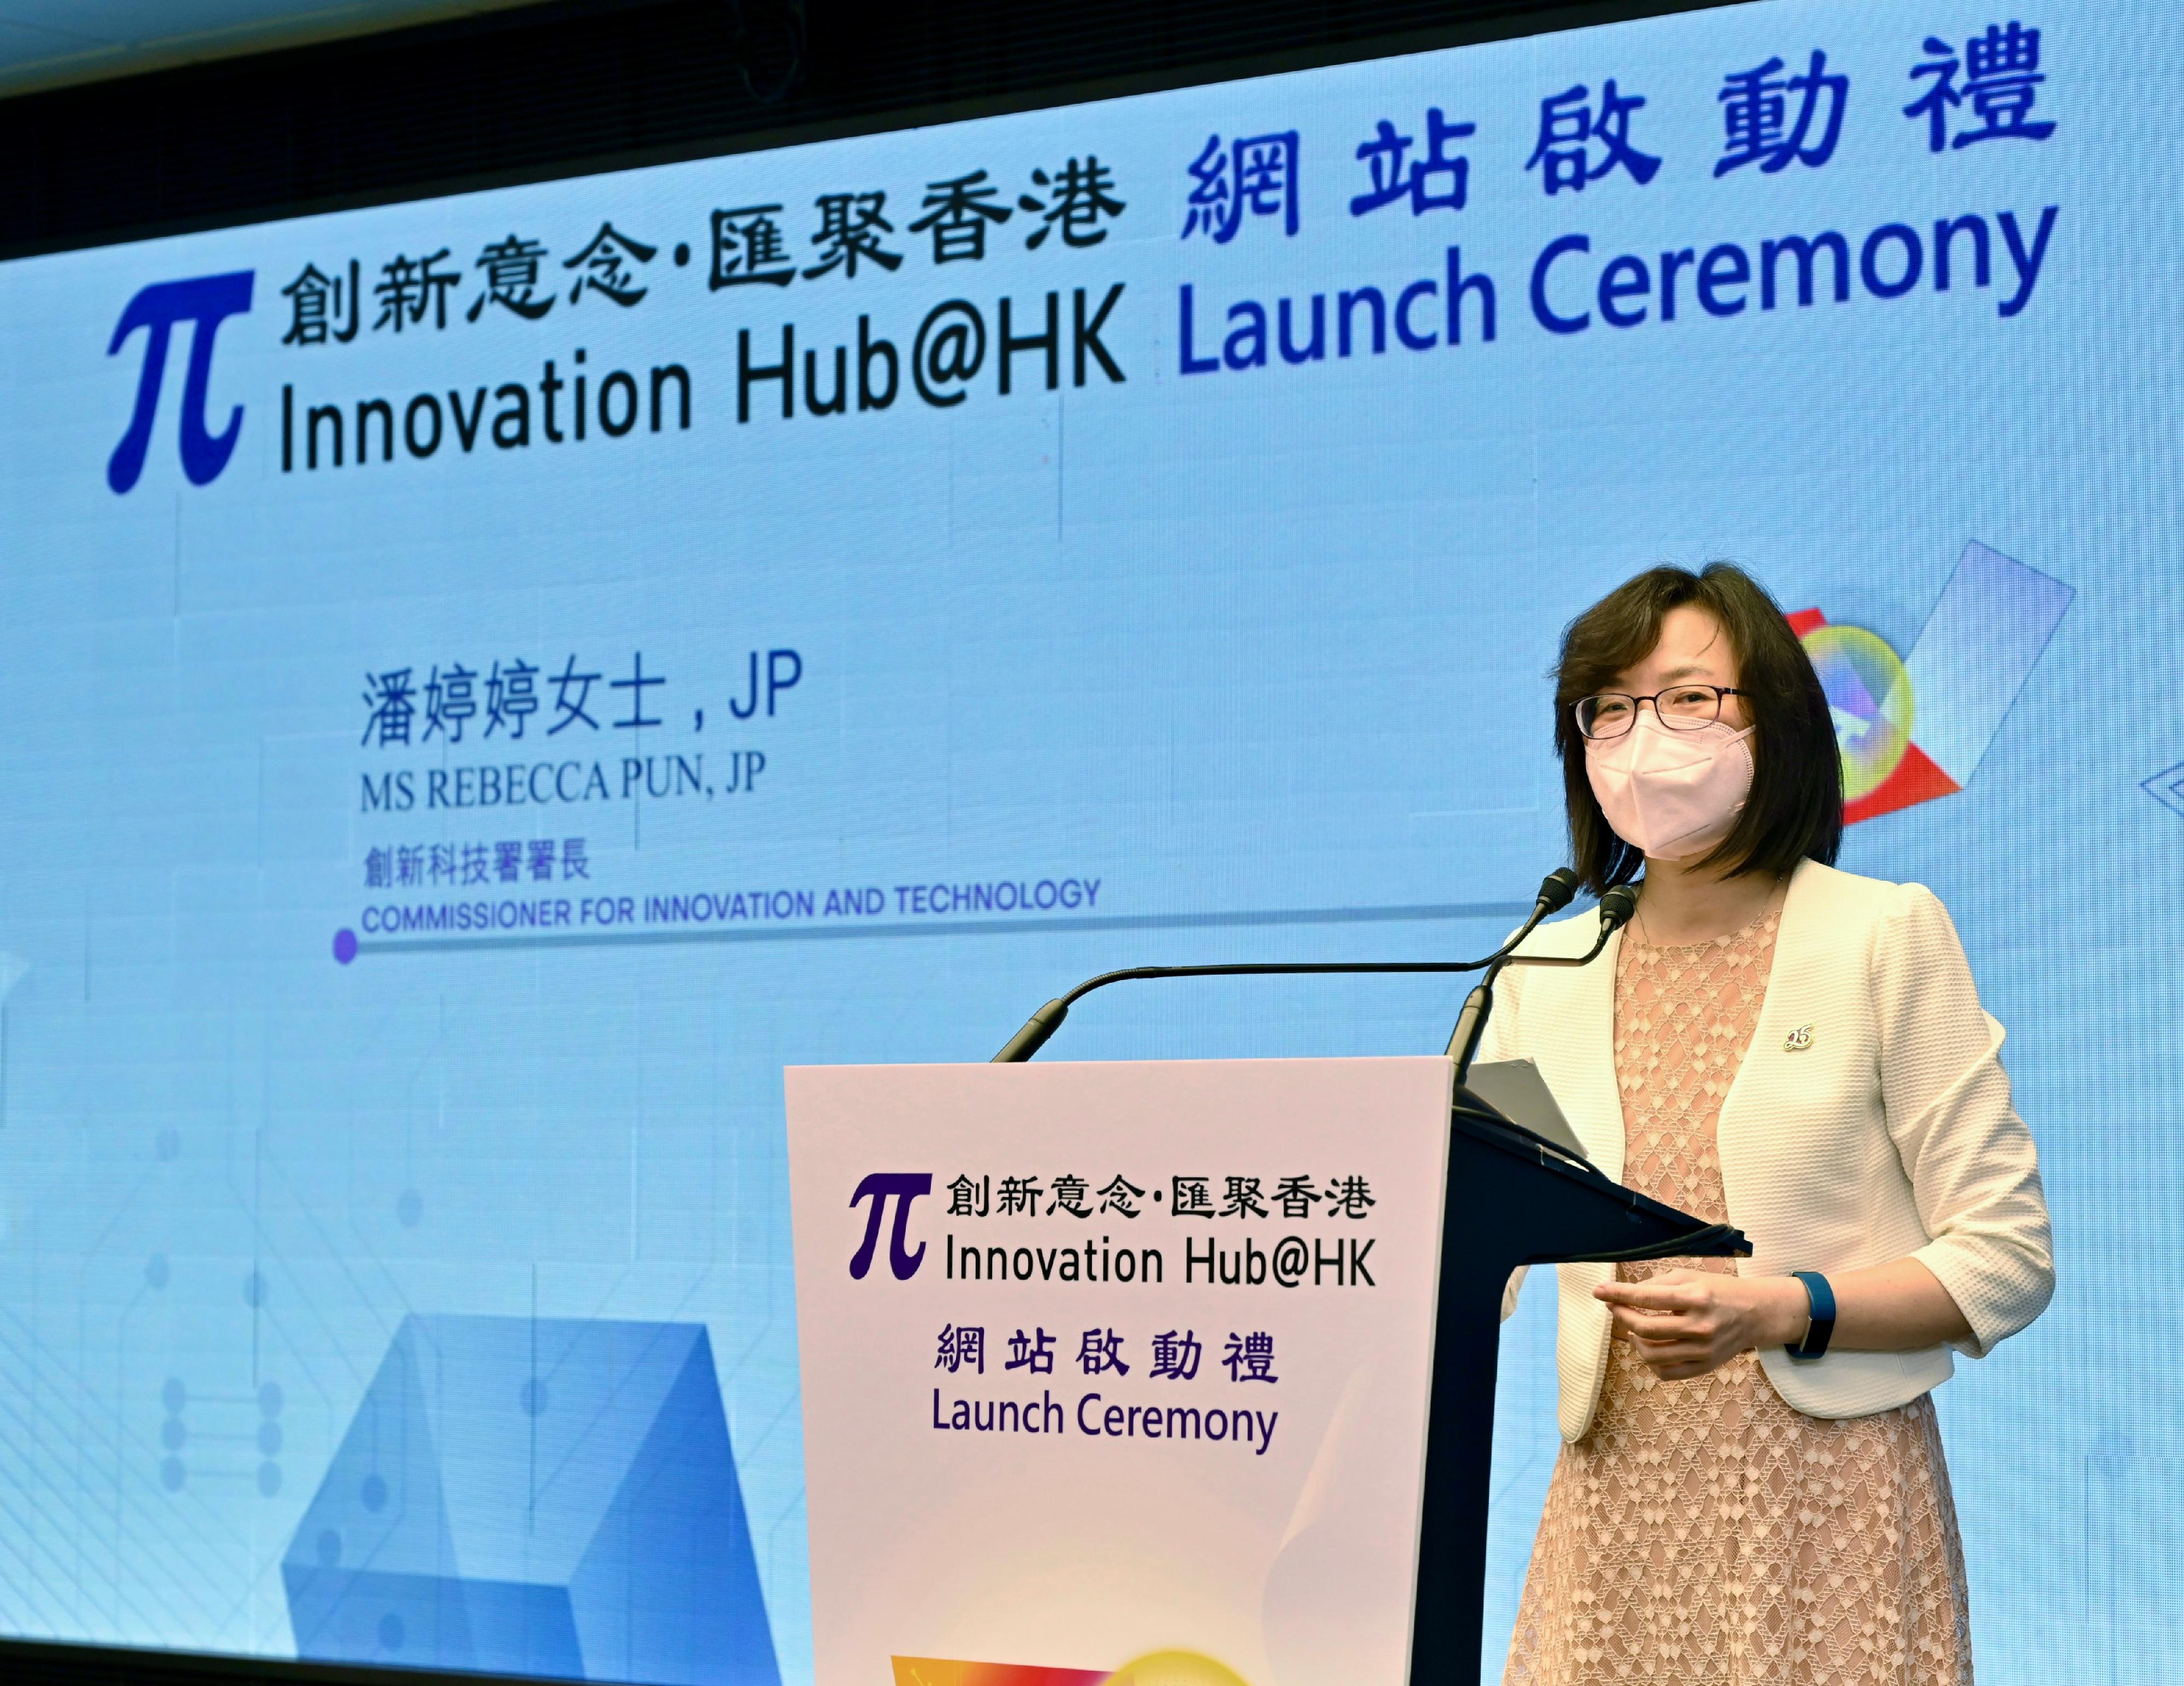 Commissioner for Innovation and Technology, Ms Rebecca Pun, speaks at the Innovation and Technology Commission’s Launch Ceremony of the Innovation Hub@HK website today (August 18).